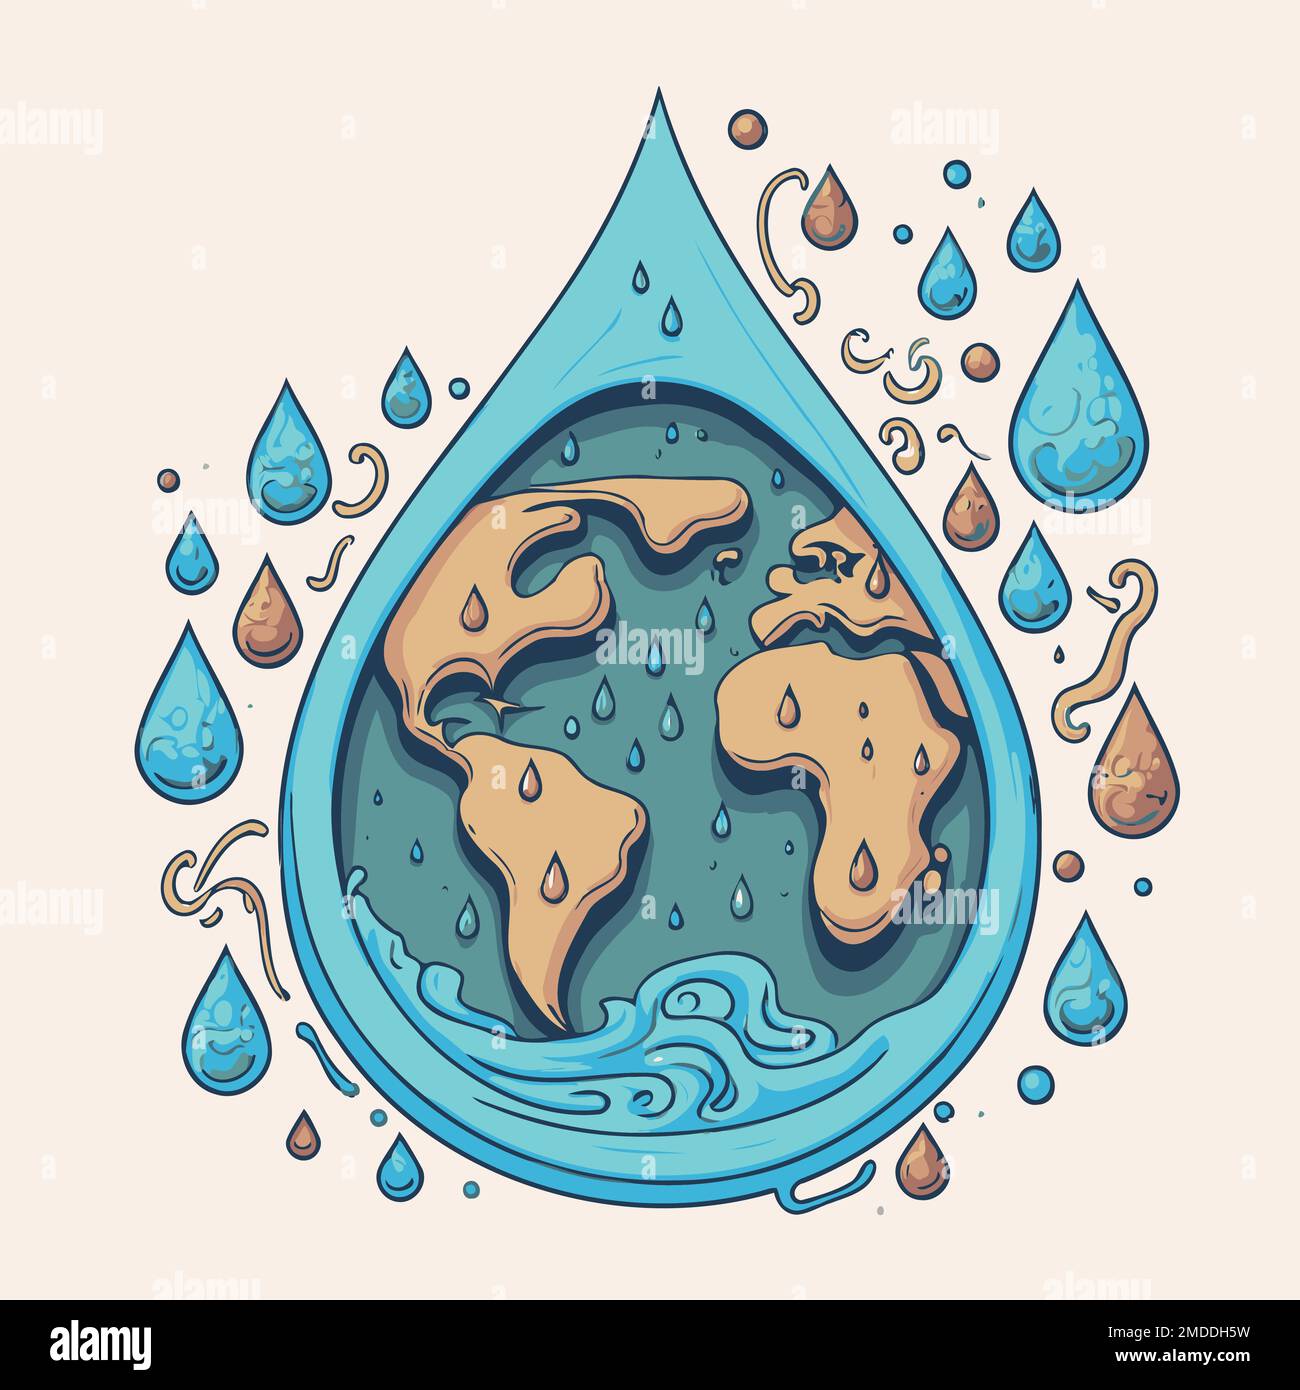 Save Water Save Earth